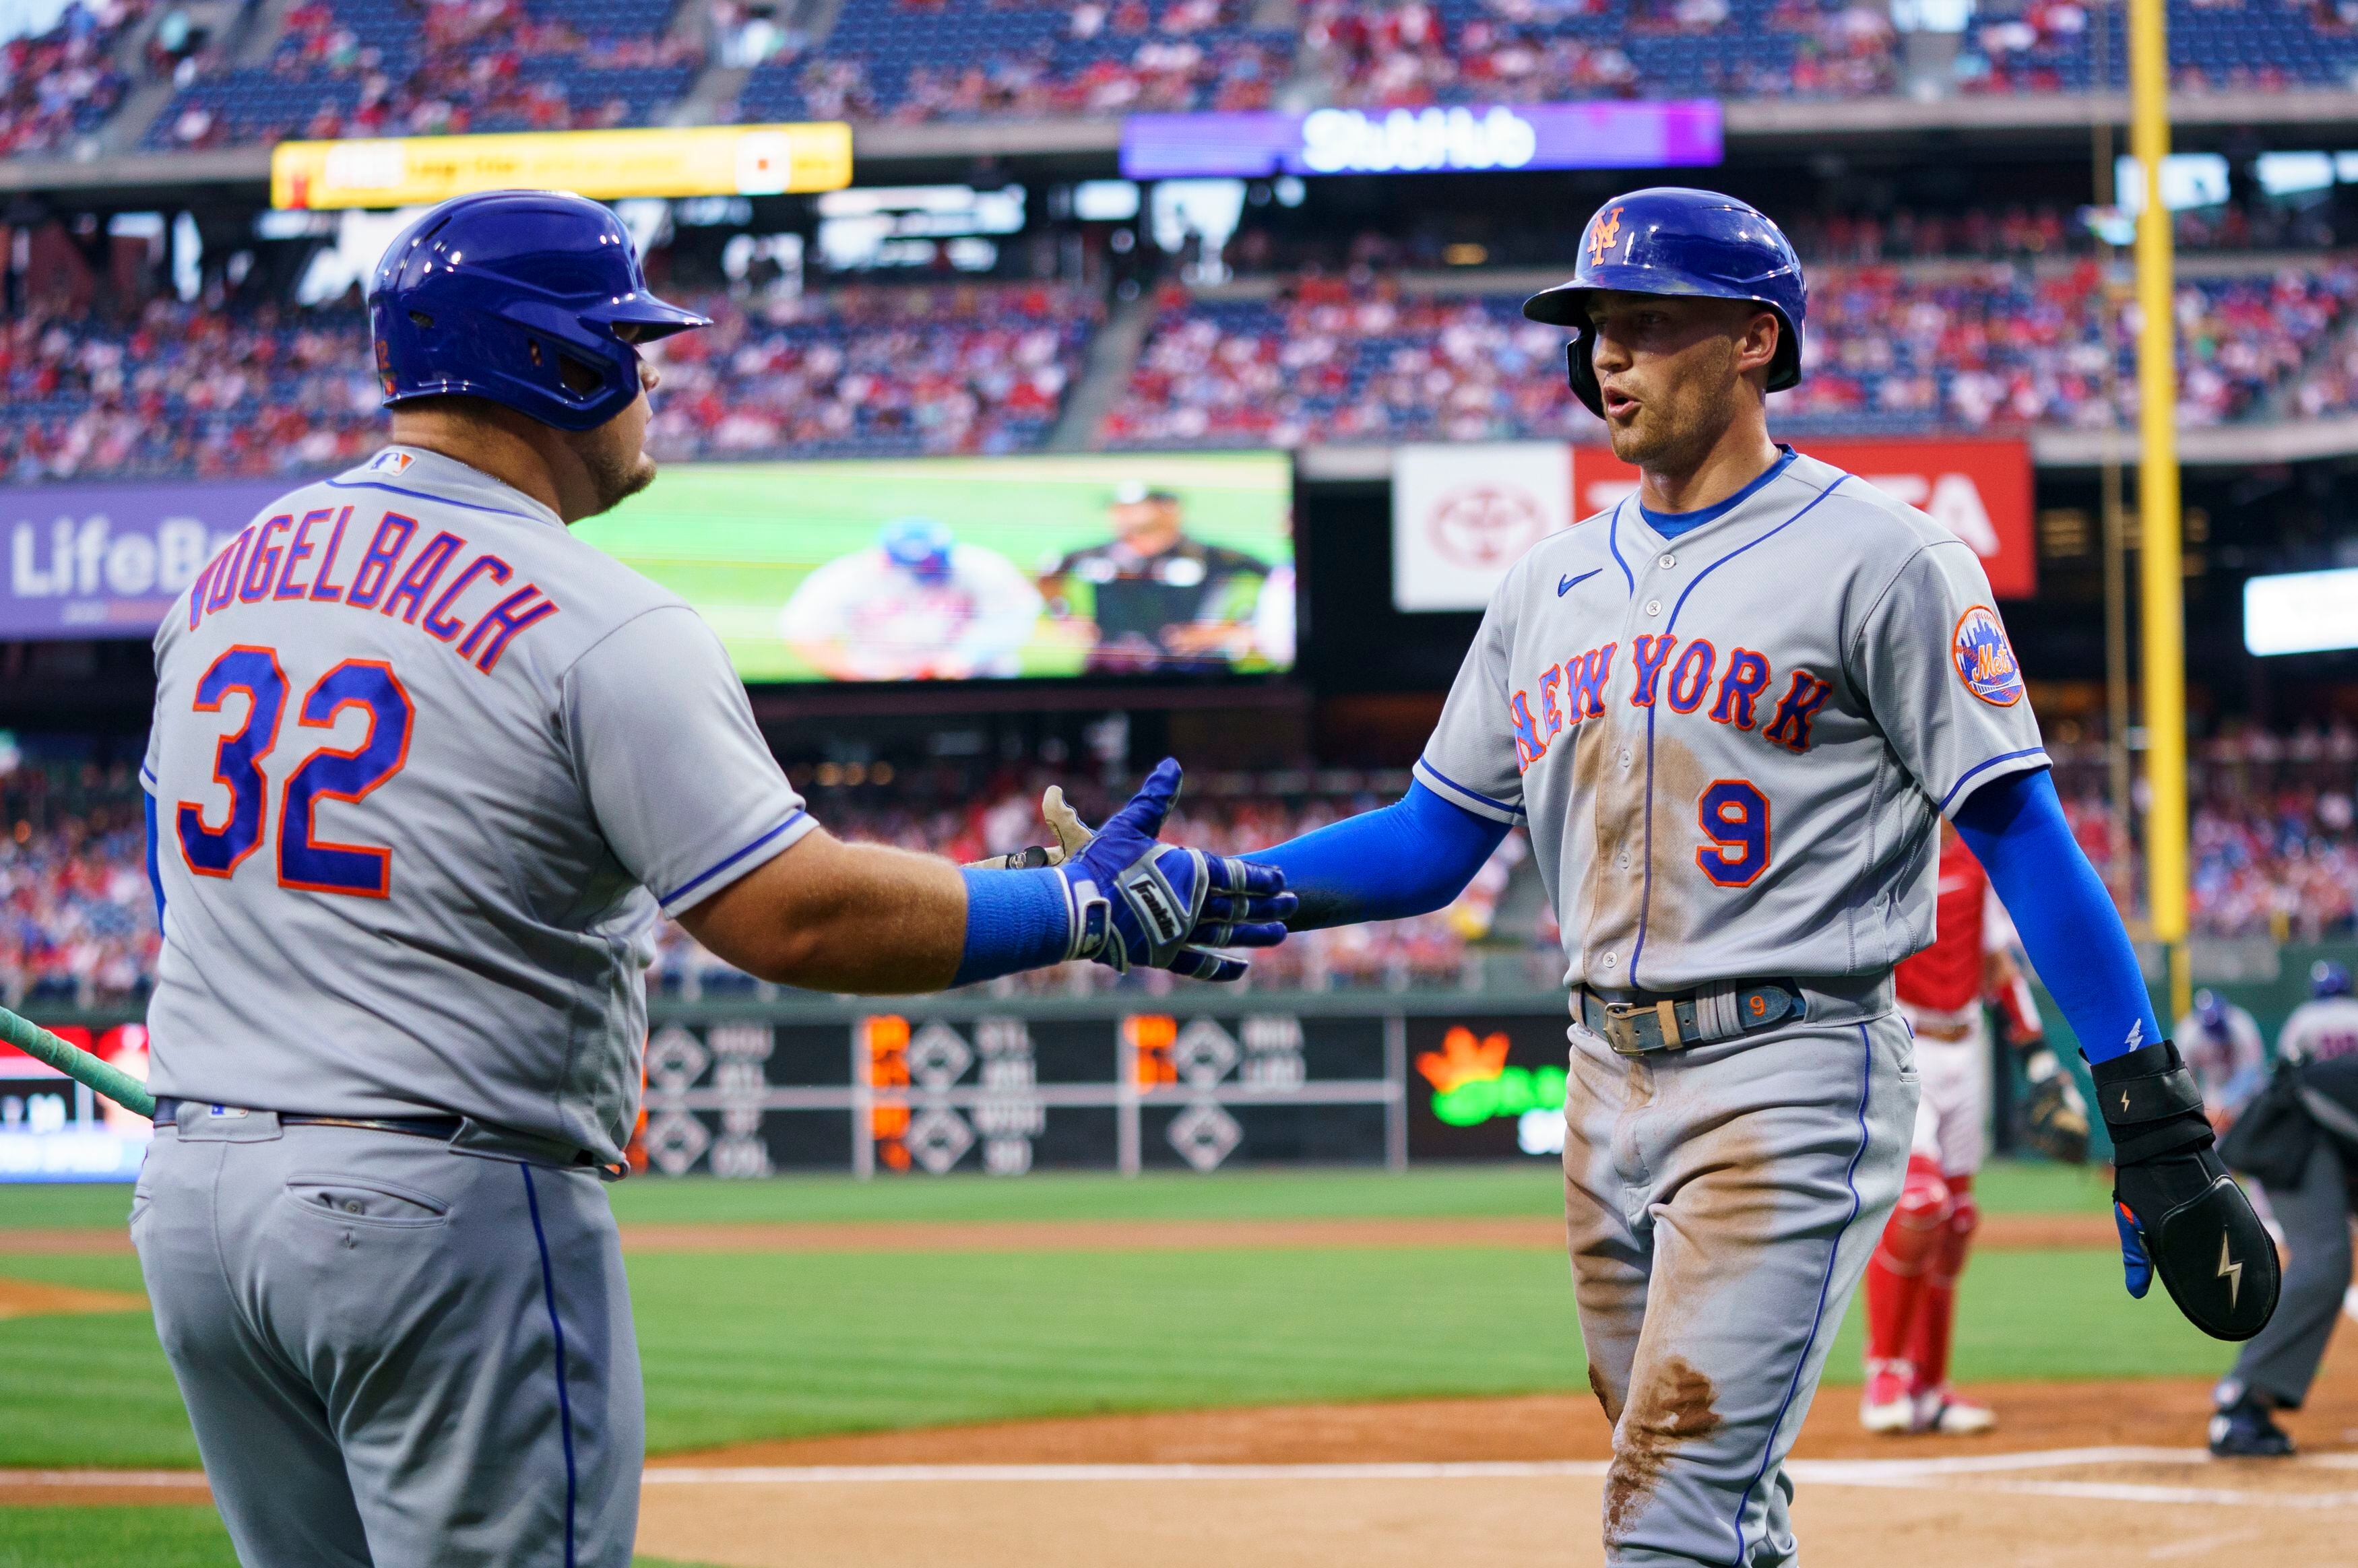 Pete Alonso has monster game as Mets defeat Phillies  Phillies Nation -  Your source for Philadelphia Phillies news, opinion, history, rumors,  events, and other fun stuff.